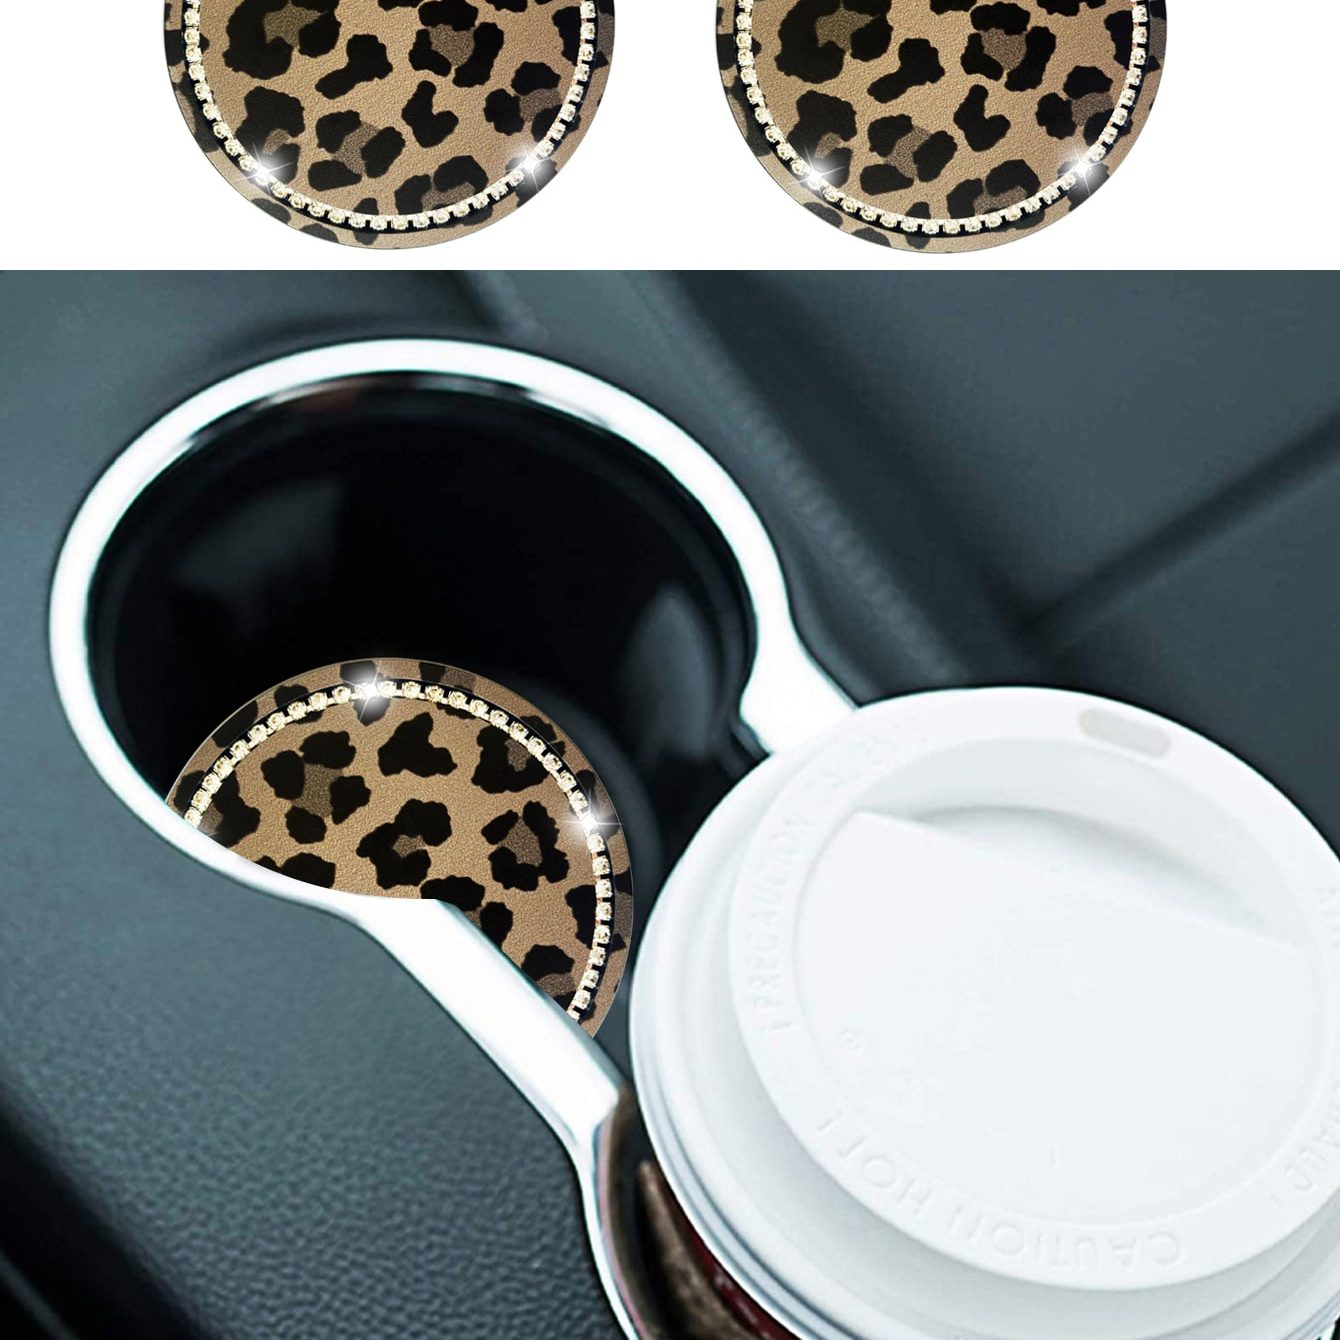  4 Pack Car Cup Holder Coaster,Rubber Backing Non-Slip Car  Coasters for Cup Holders,2.75 inch New Print Car Coasters Absorbent with  Finger Notch,Automotive Cup Holder Car Accessories (Cheetah) : Automotive